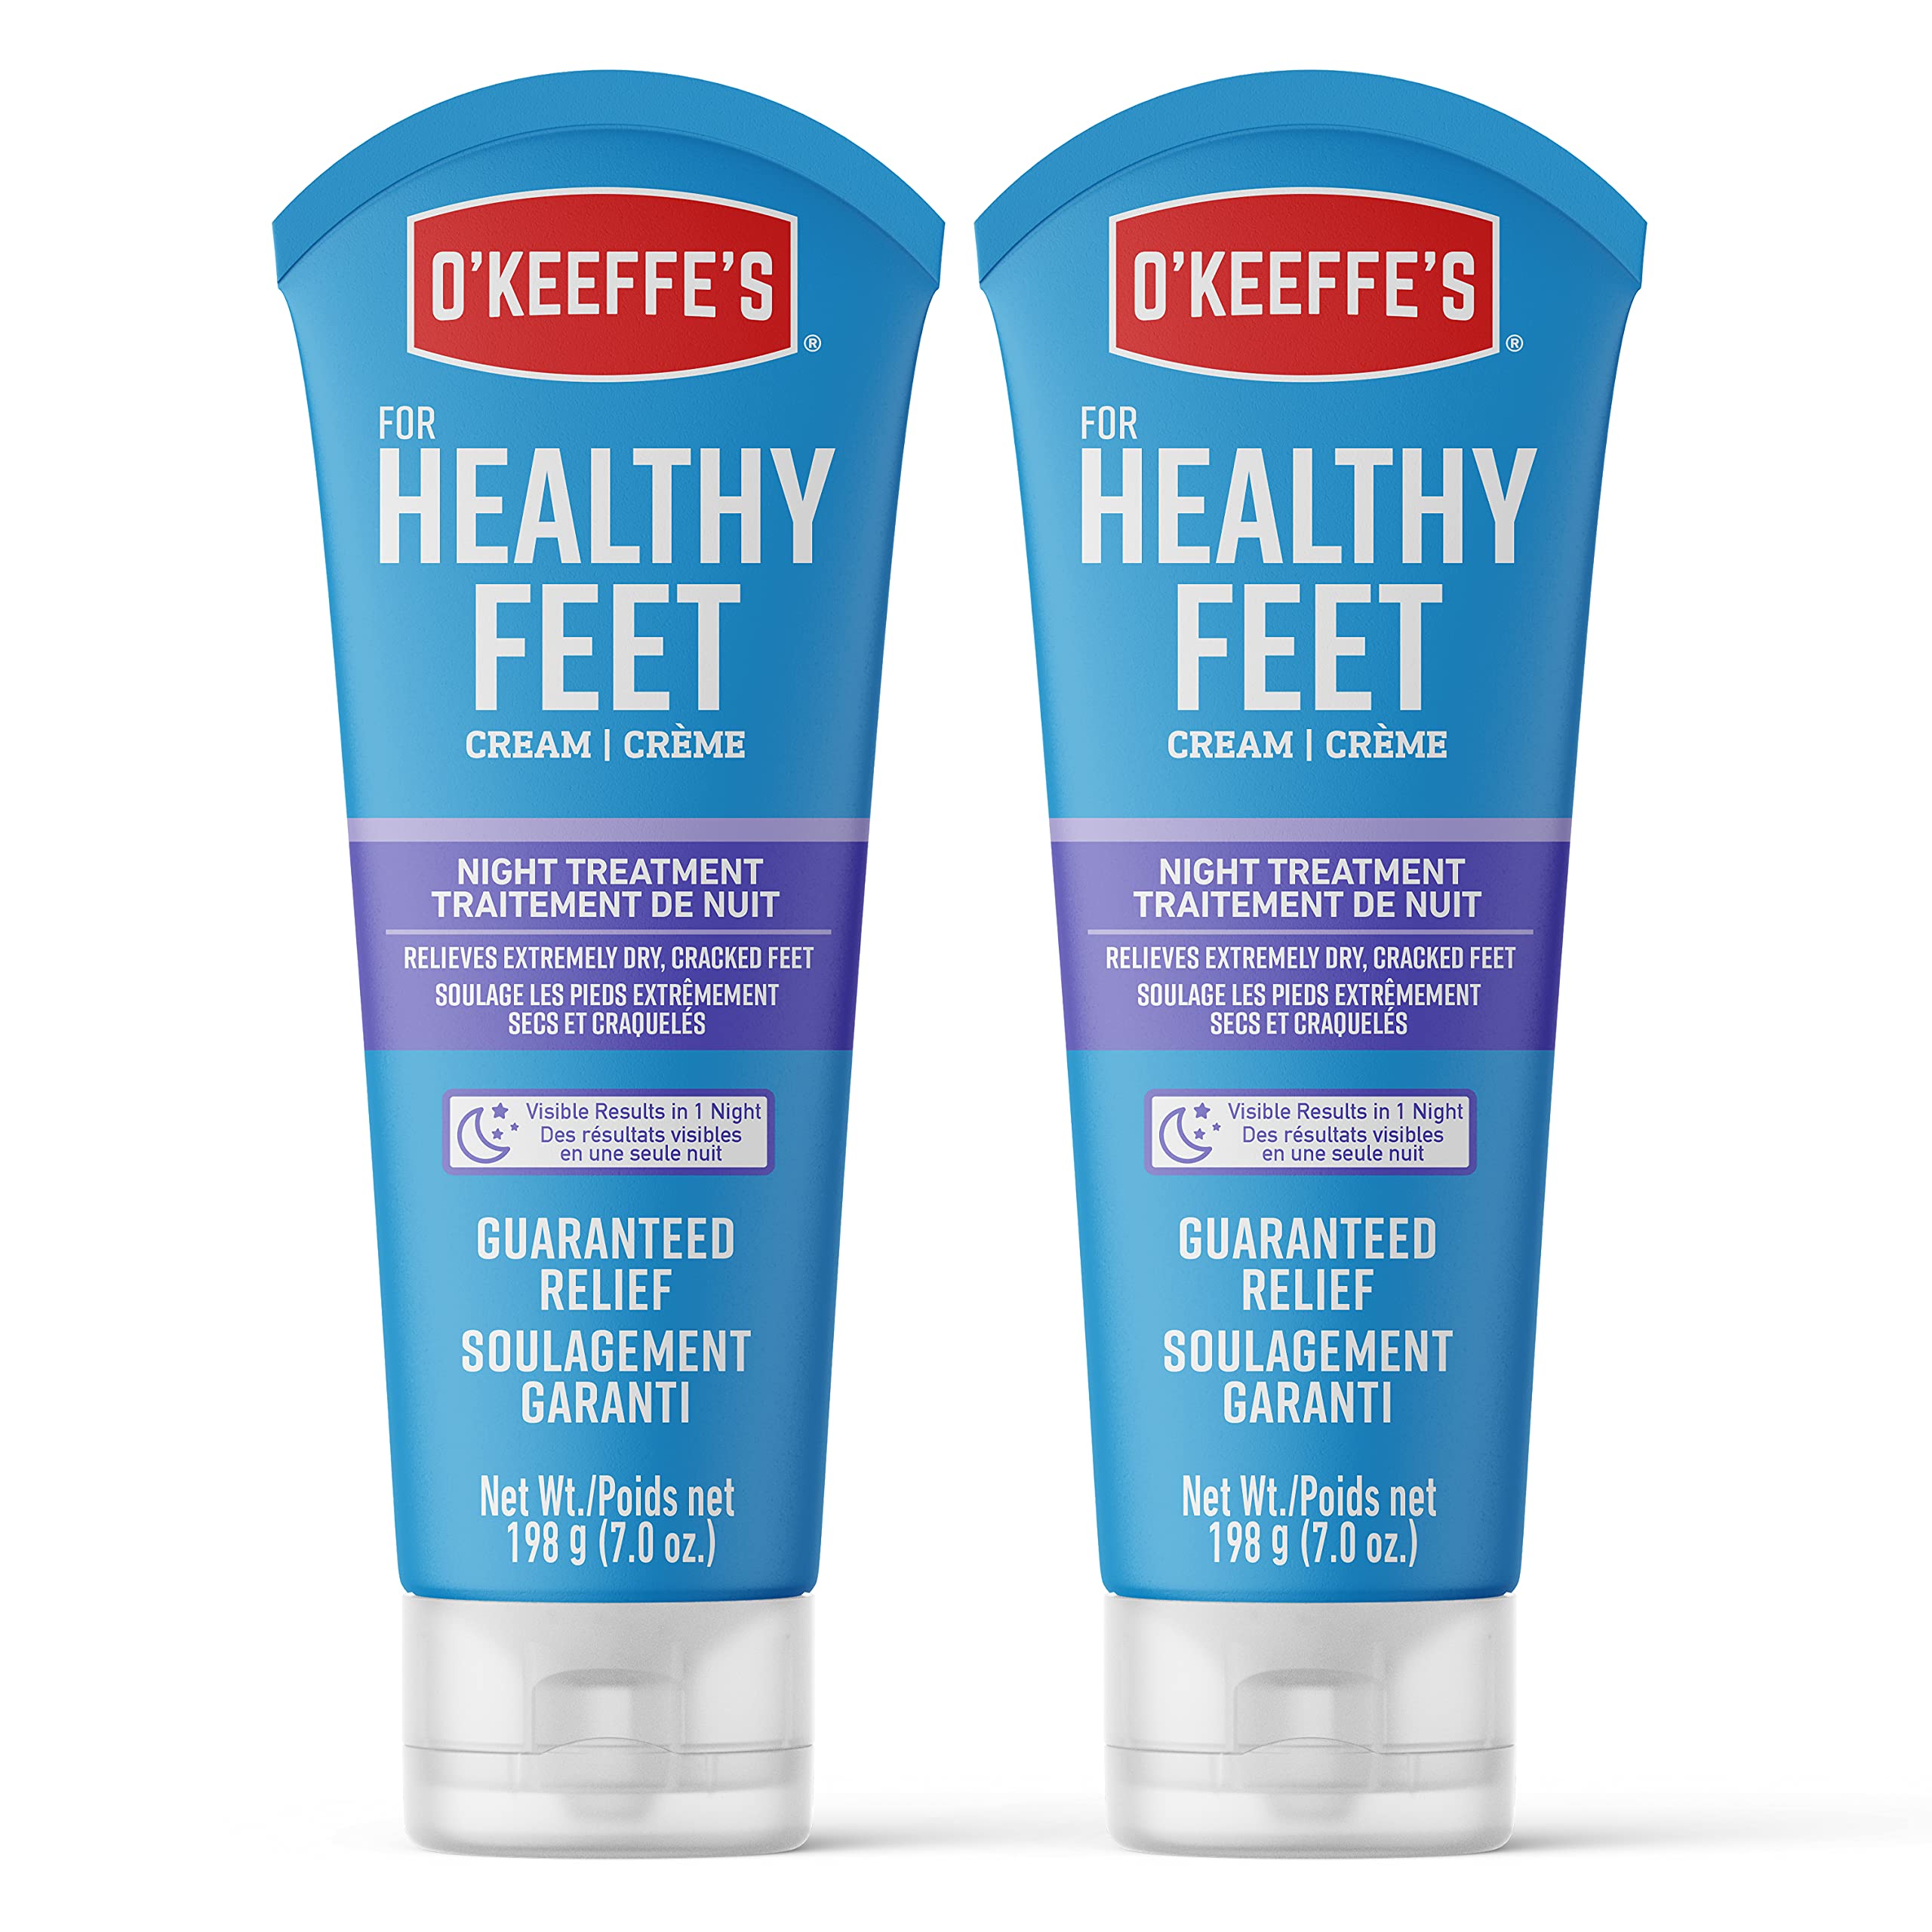 O'Keeffe's for Healthy Feet Night Treatment Foot Cream, Guaranteed Relief for Extremely Dry, Cracked Feet, Visible Results in 1 Night, 7.0 Ounce Tube, (Pack of 2)